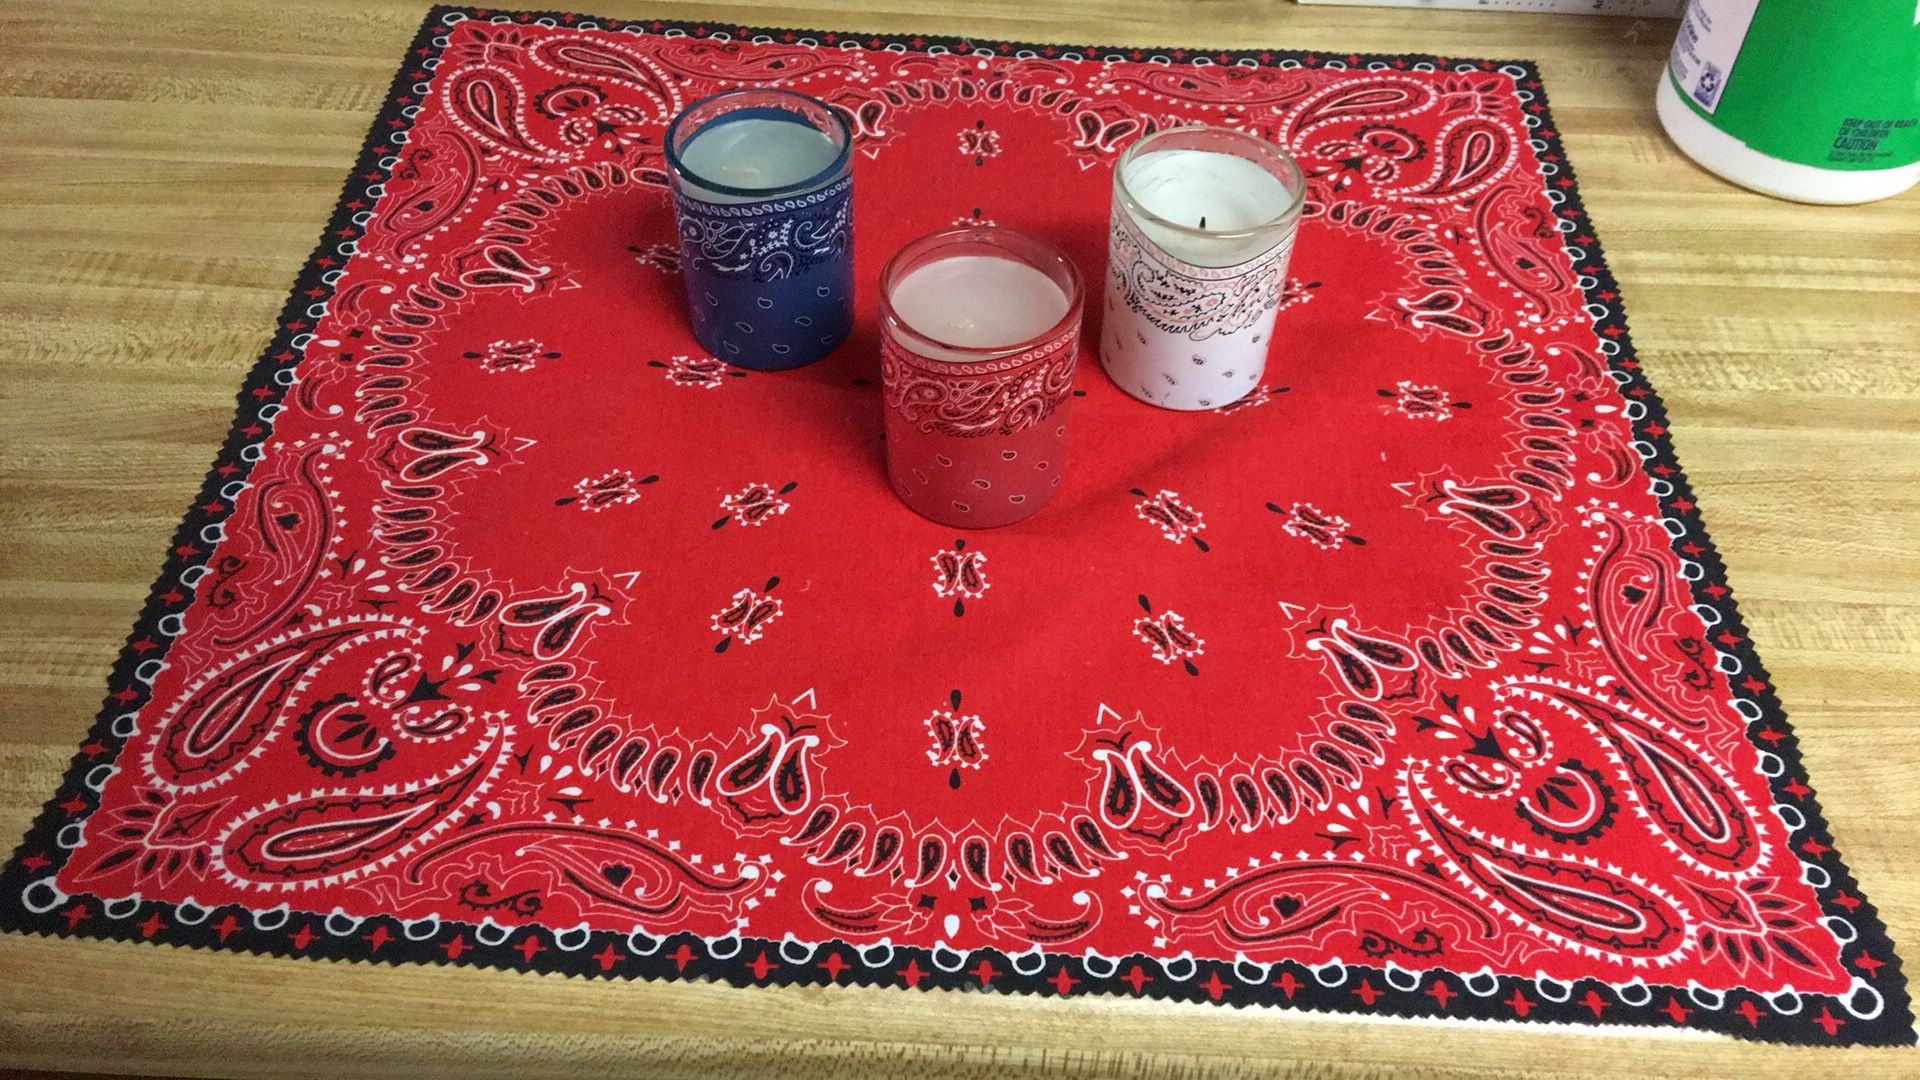 et of 1 red/white/black bandanna centerpiece Approximately 16x16 And 3 bandanna candles red, white, blue 3” high